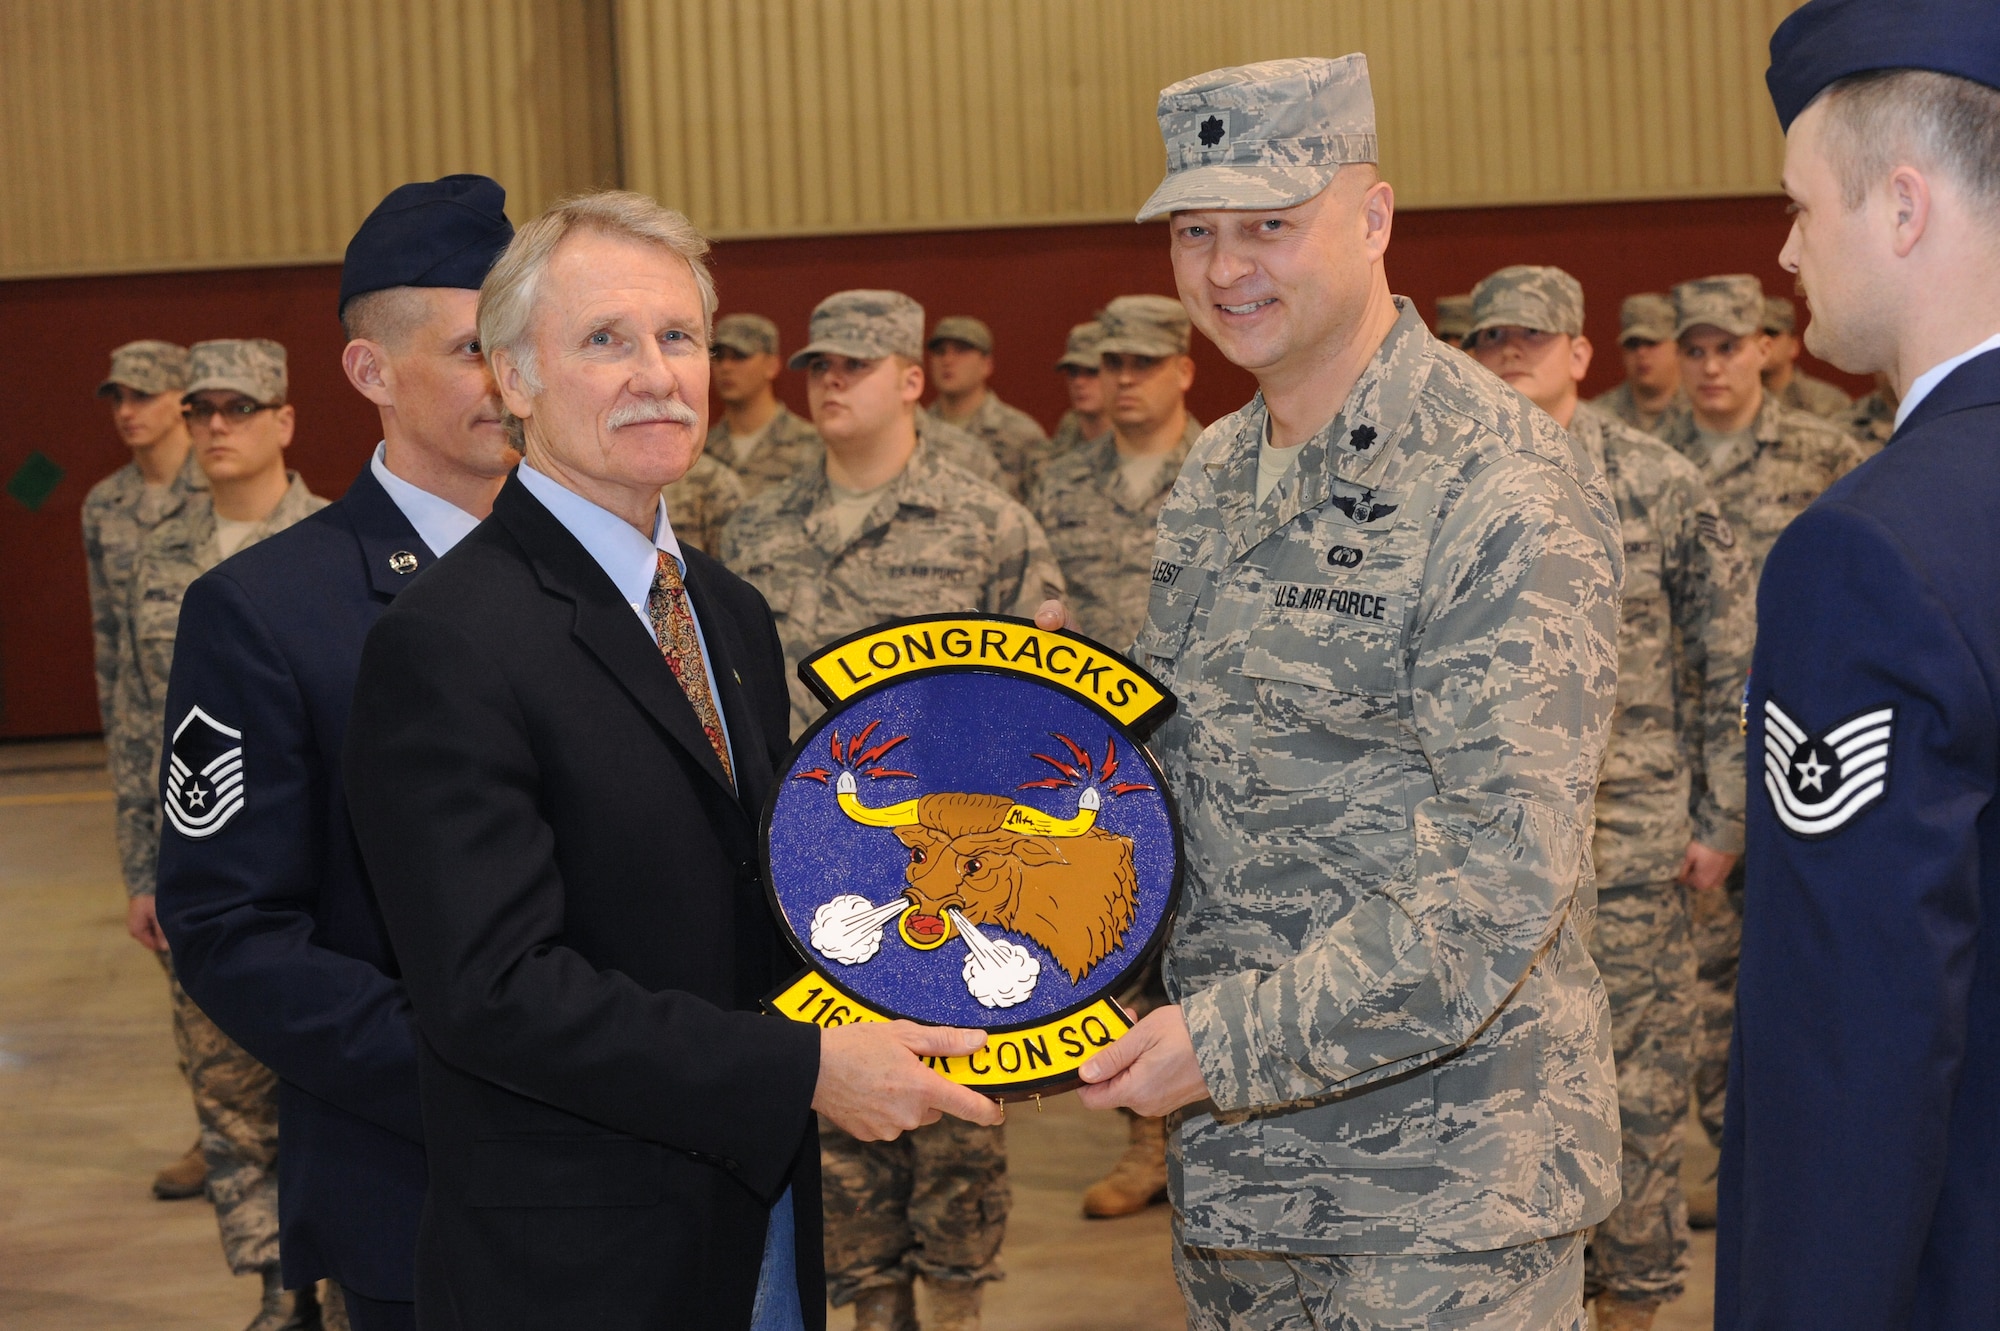 Oregon Air National Guard 116th Air Control Squadron Commander, Lt. Col. Gregor Leist (right), presents Oregon Governor John Kitzhaber with his unit's official crest, during their mobilization ceremony at the Portland Air Guard Base in Portland, Ore., Mar. 4.  More than 80 Airmen from the unit will deploy to the Middle East in support of Air Forces Central (CENTAF), where they will perform Air Battle Management missions for four months.  Kitzhaber, Maj. Gen. Raymond F. Rees, Adjutant General, Oregon; Brig. Gen. Steven Gregg, Oregon Air National Guard Commander; Congressman David Wu (OR-District 1), and other dignitaries, along with hundreds of family, friends, fellow Airmen and Soldiers attended the event.  (U.S. Air Force photograph by Tech. Sgt. John Hughel, 142nd Fighter Wing Public Affairs)